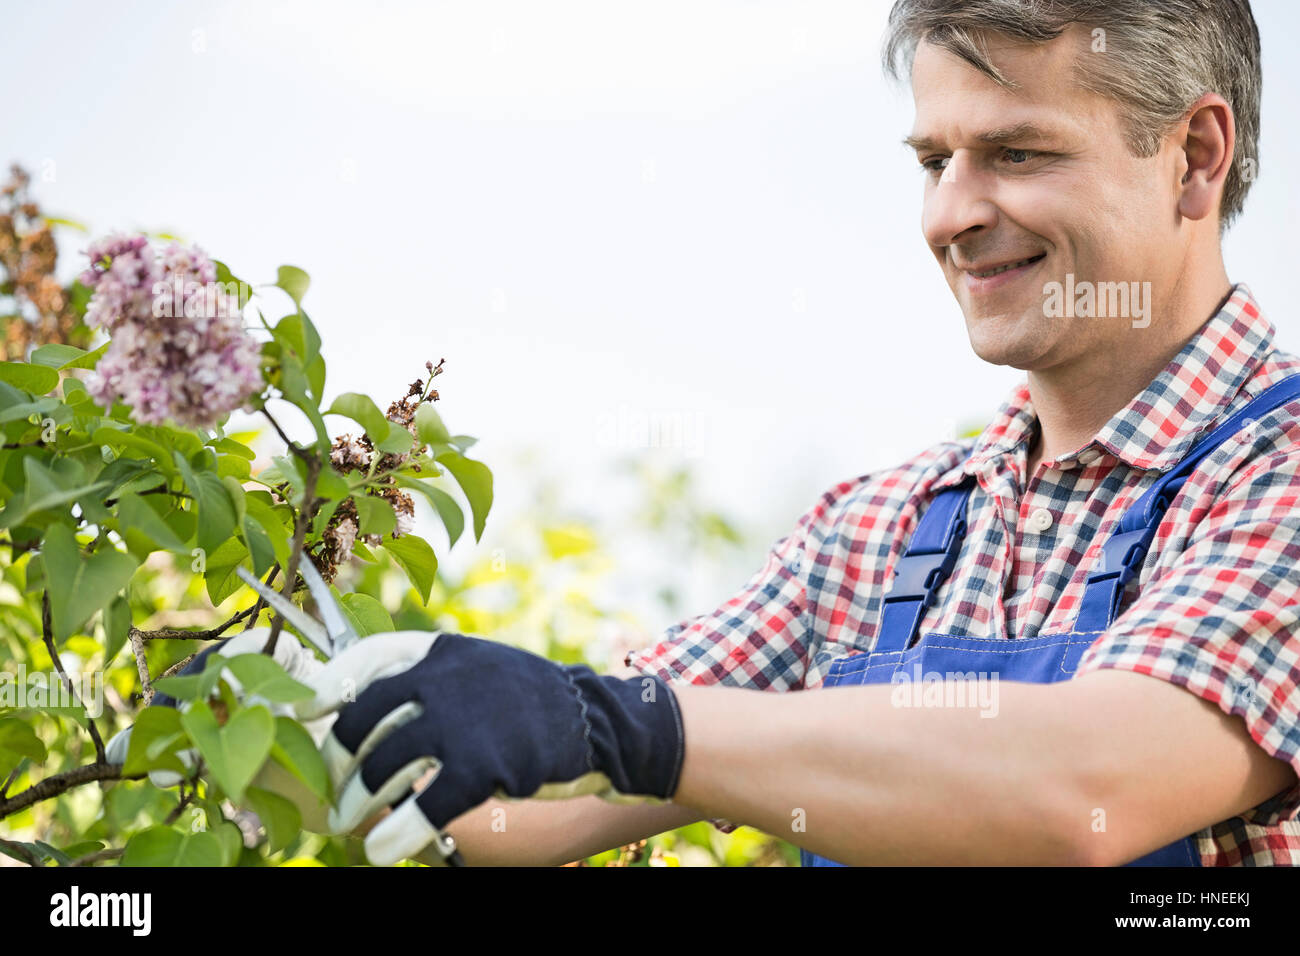 Man cutting branches at garden Stock Photo